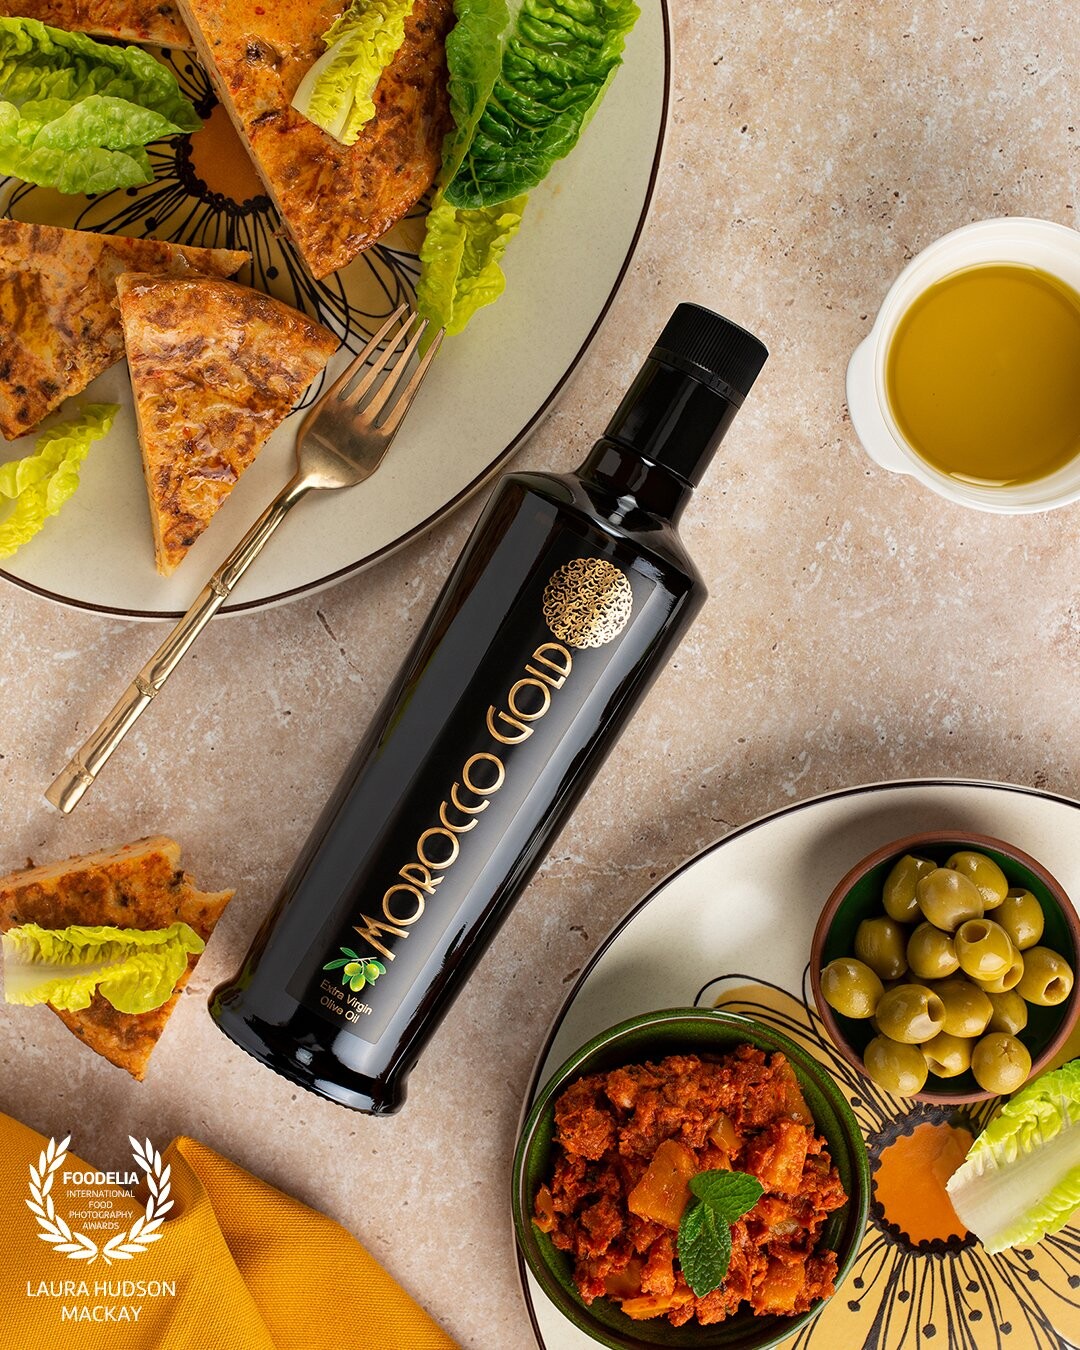 Delicious egg, potato and onion tortilla cooked gently in olive oil and served on cheery plates that POP! Photoshoot for Morocco Gold, award-winning luxury extra virgin olive oil.